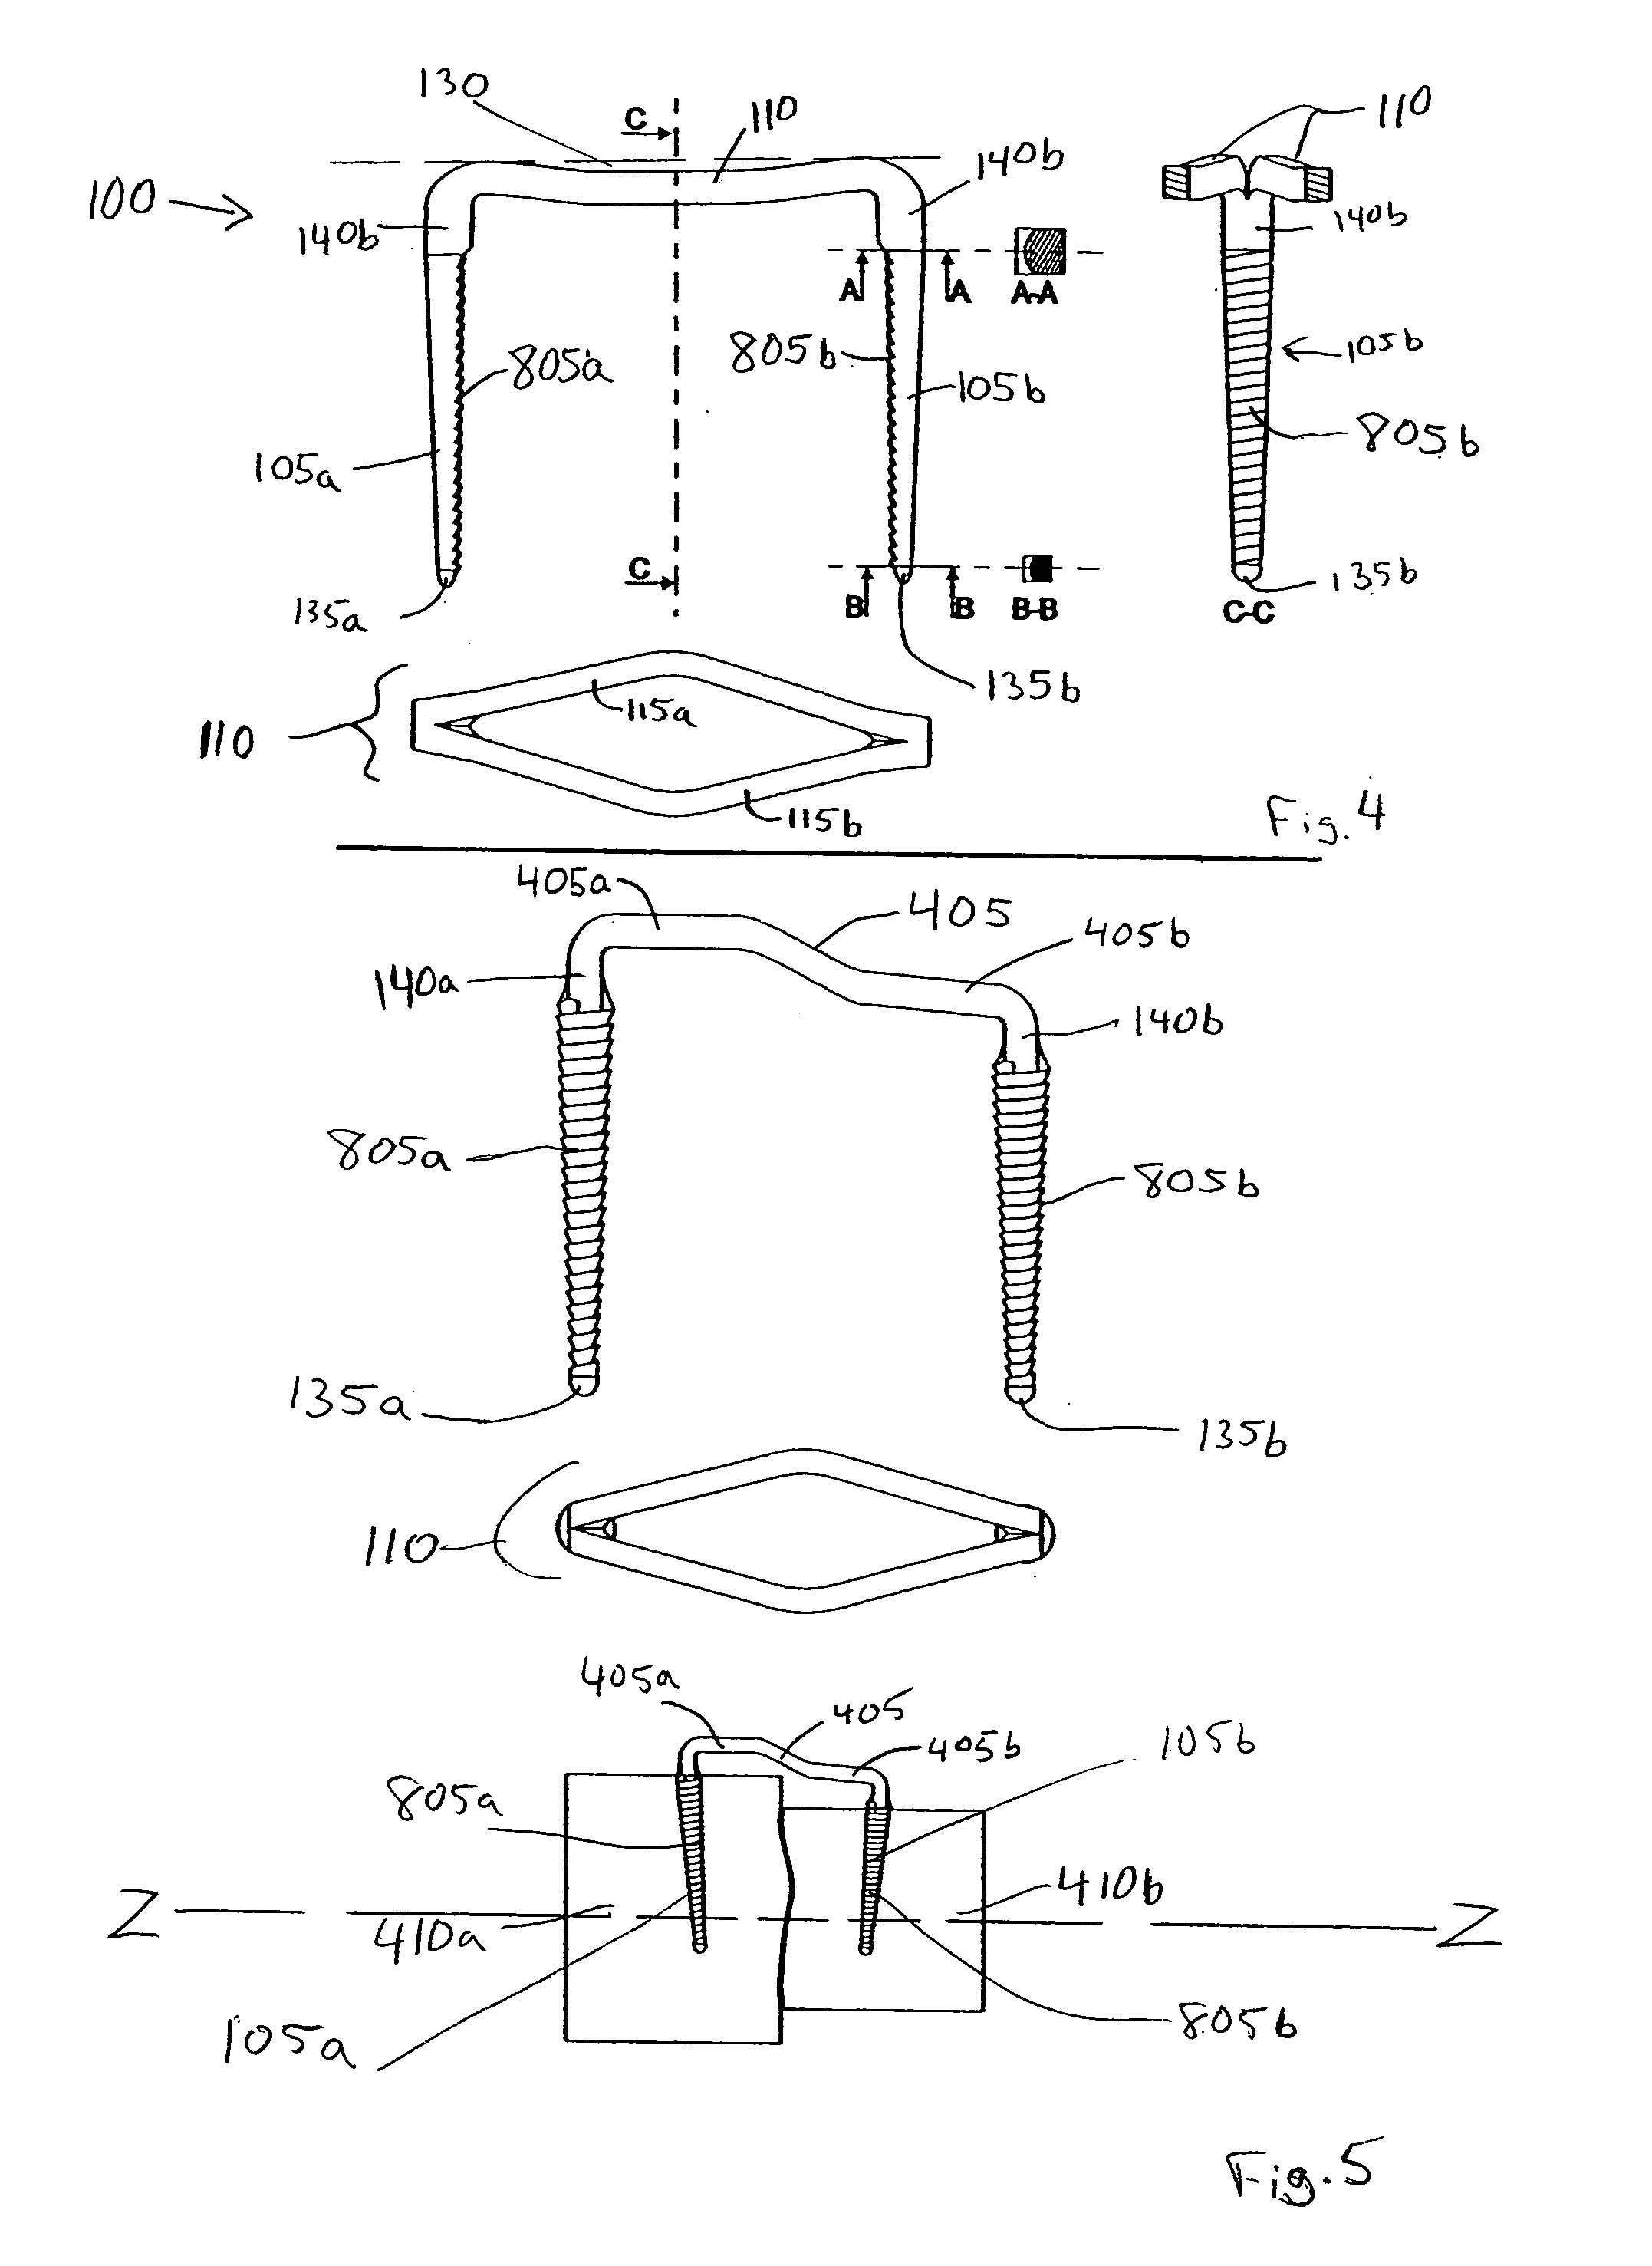 Osteosynthesis clip and insertion tool for inserting an osteosynthesis clip into bone tissue fragments